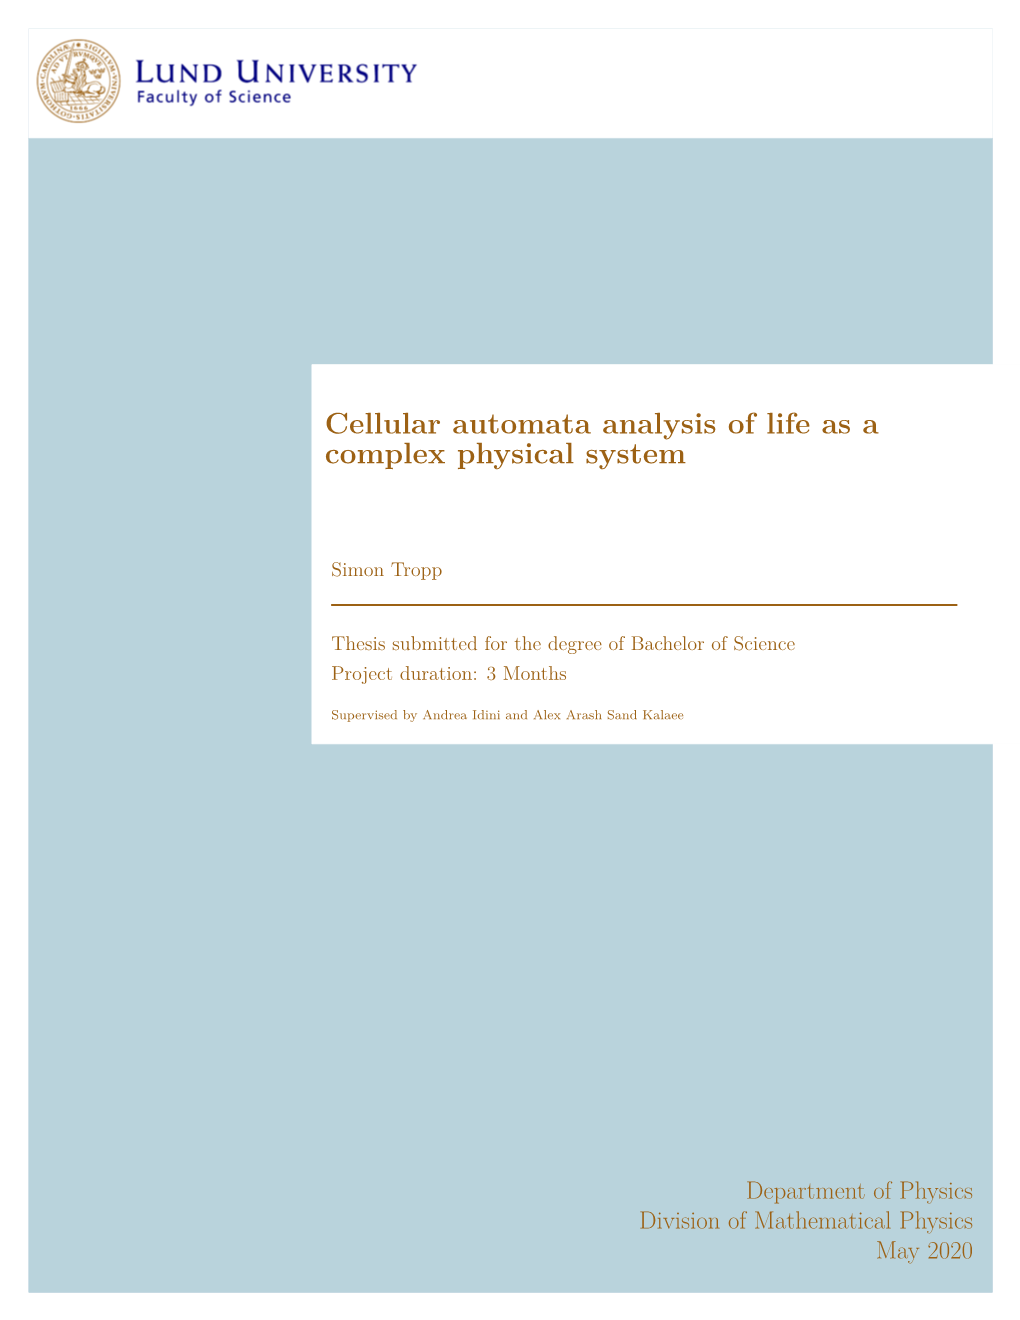 Cellular Automata Analysis of Life As a Complex Physical System